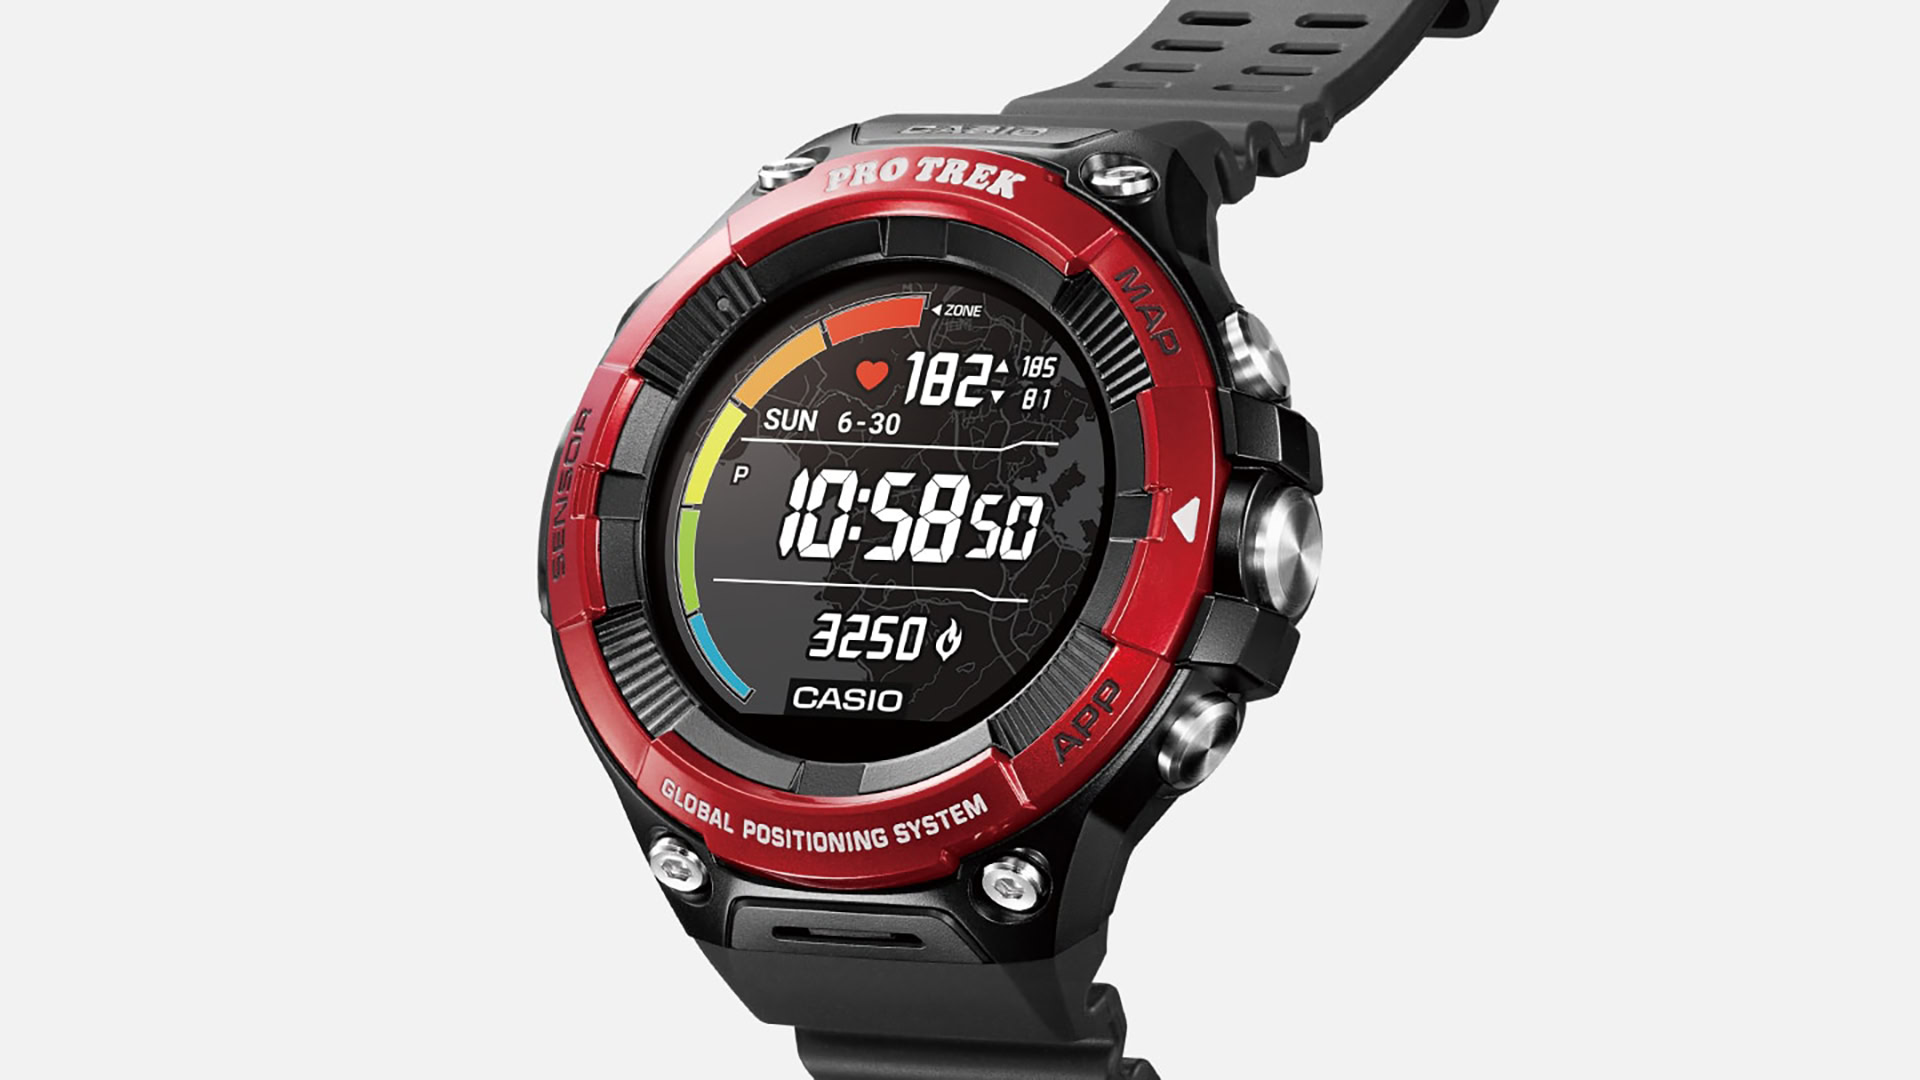 The Casio WSD-F21HR has a heart rate monitor, finally - Android Authority